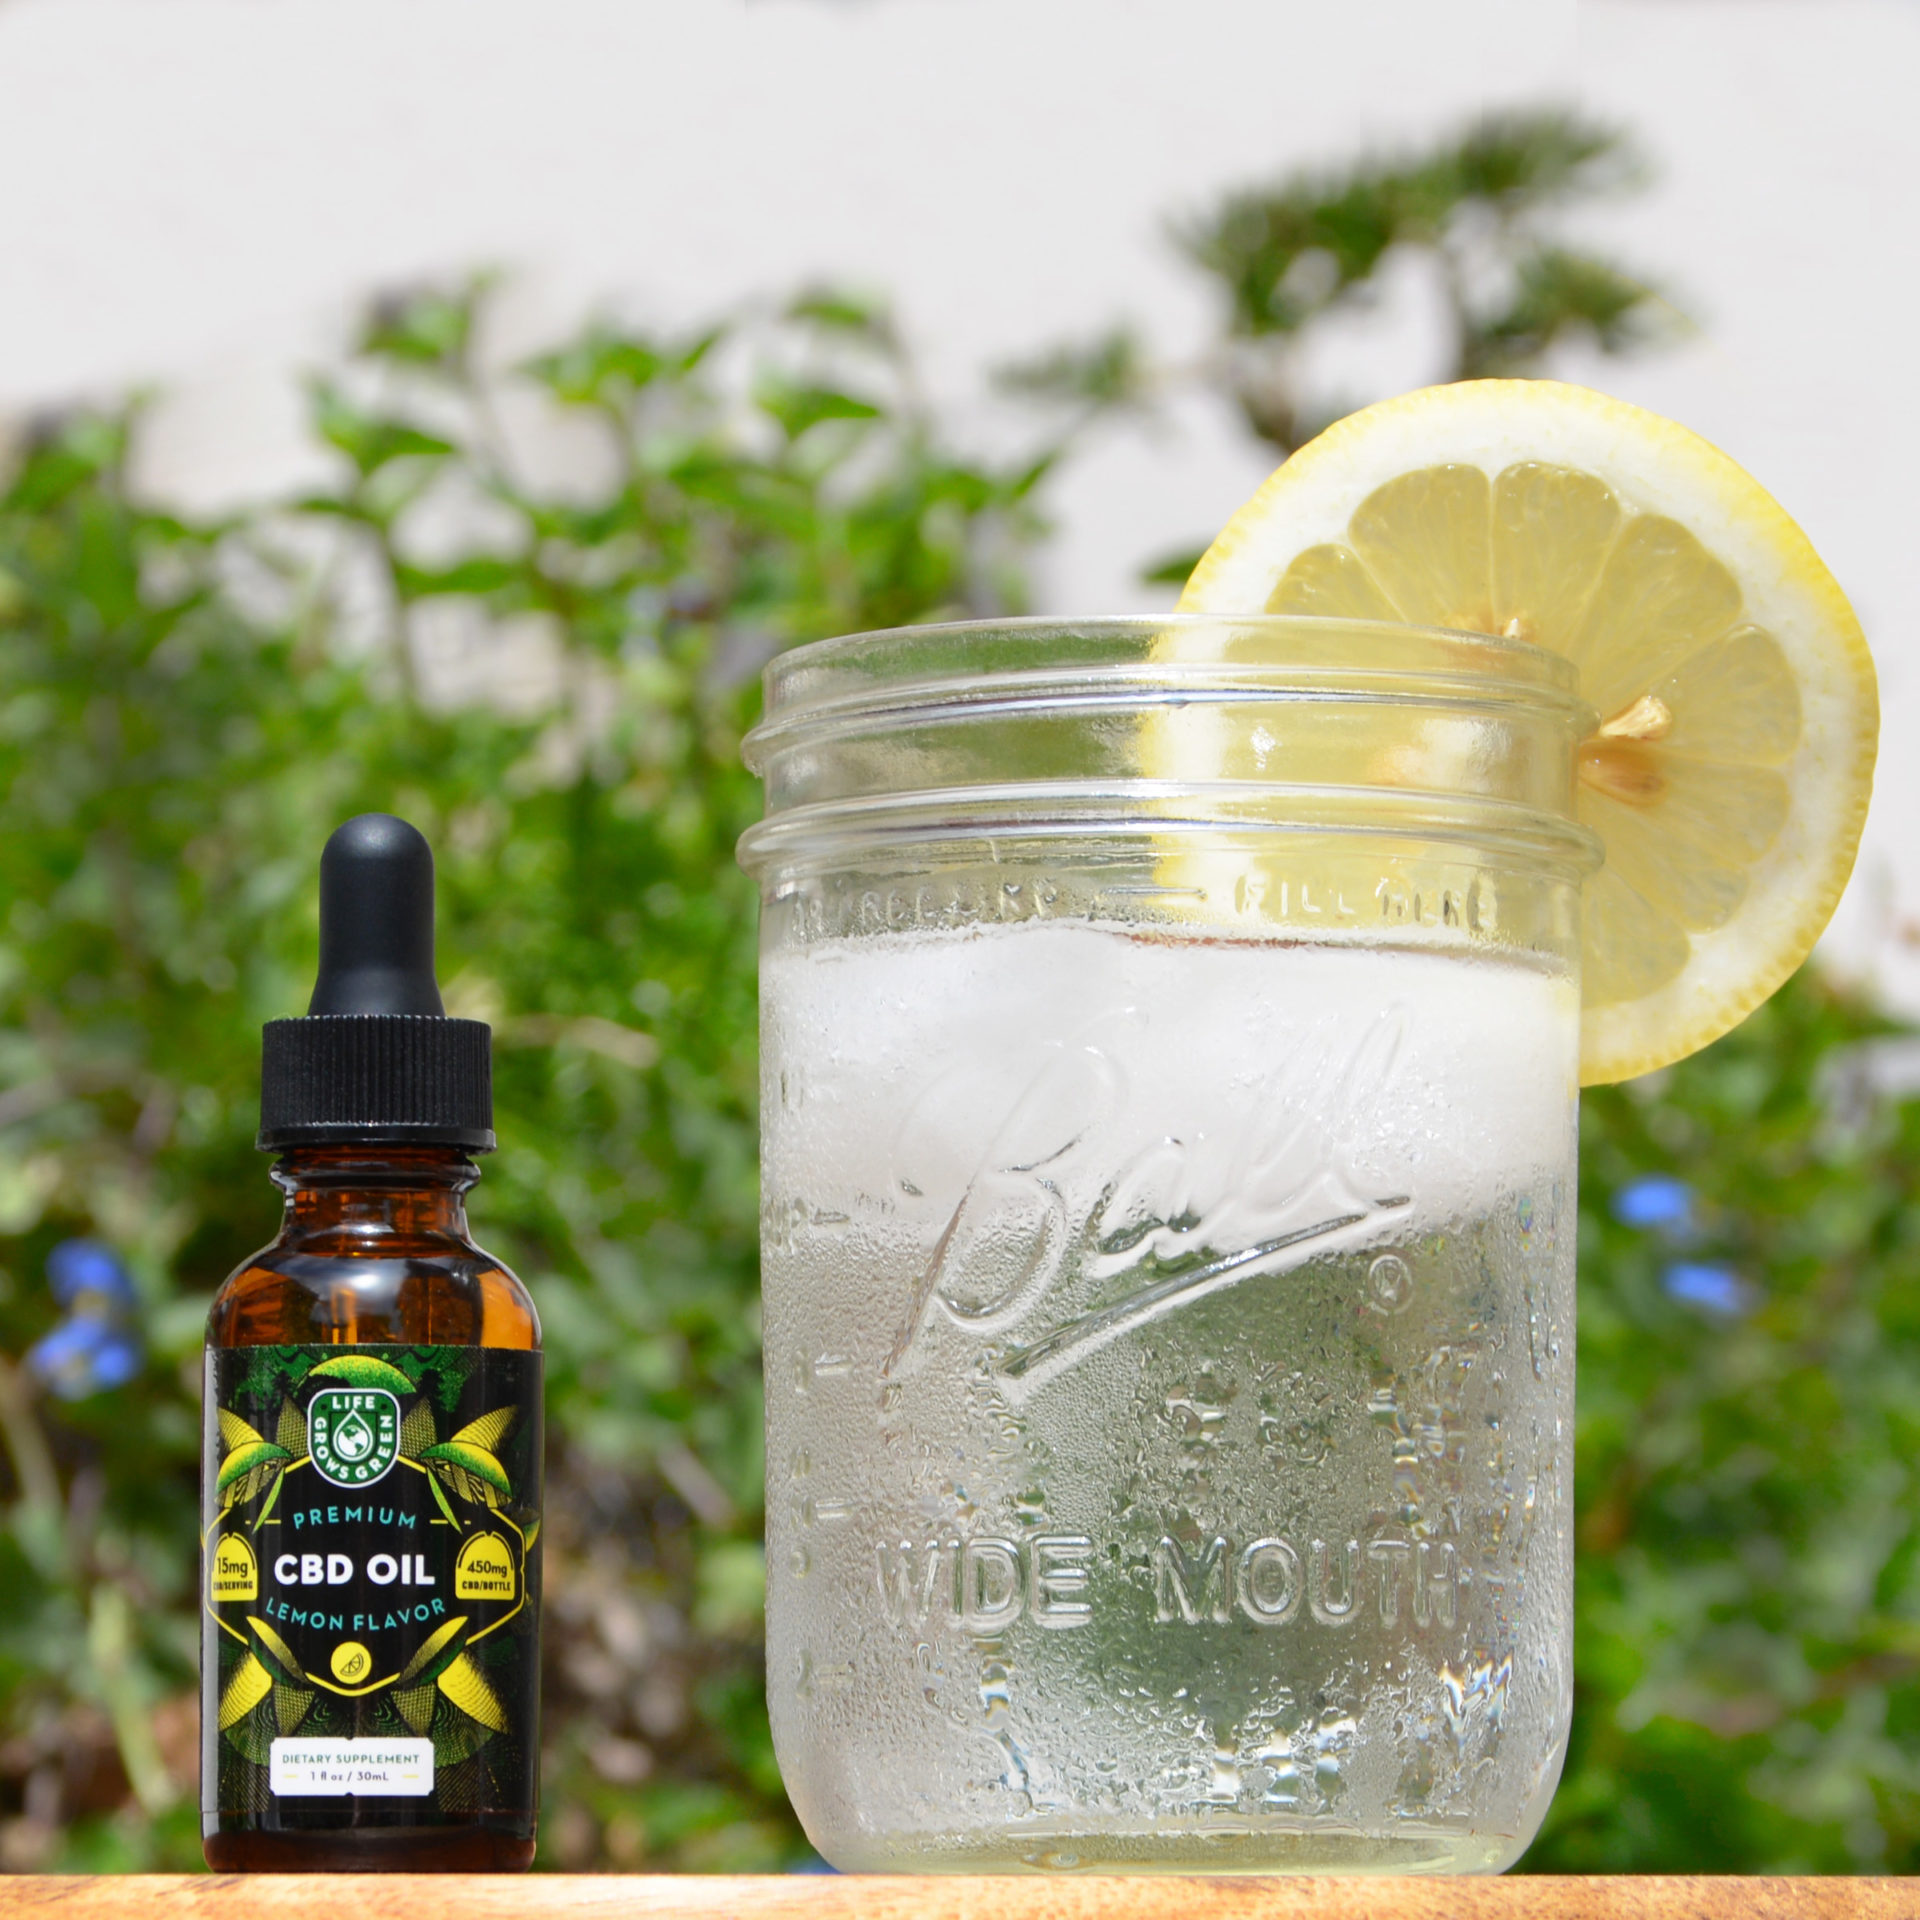 A bottle of lemon flavored Life Grows Green cbd oil next to a glass of lemon water.